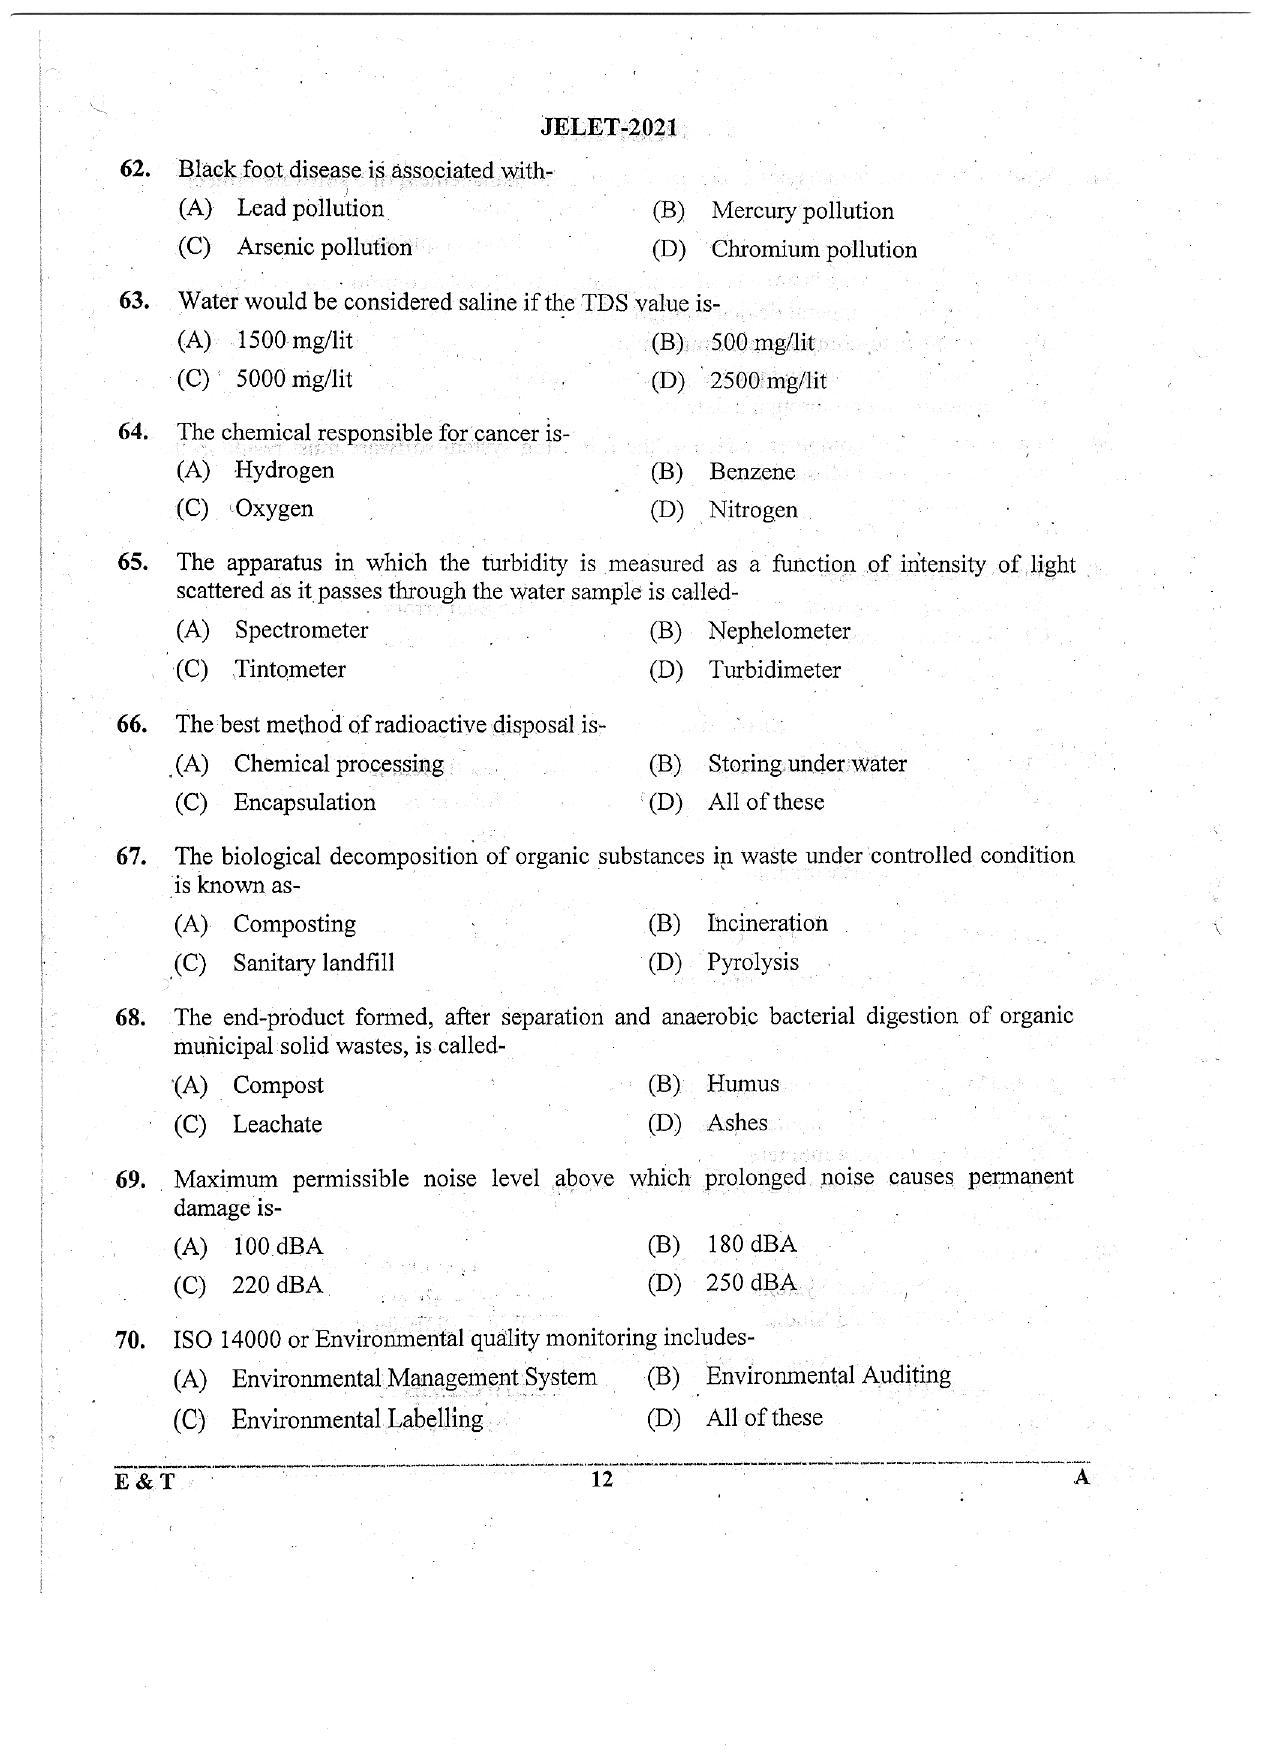 WBJEE  JELET 2021 ( Engg. & Tech.) - Page 12